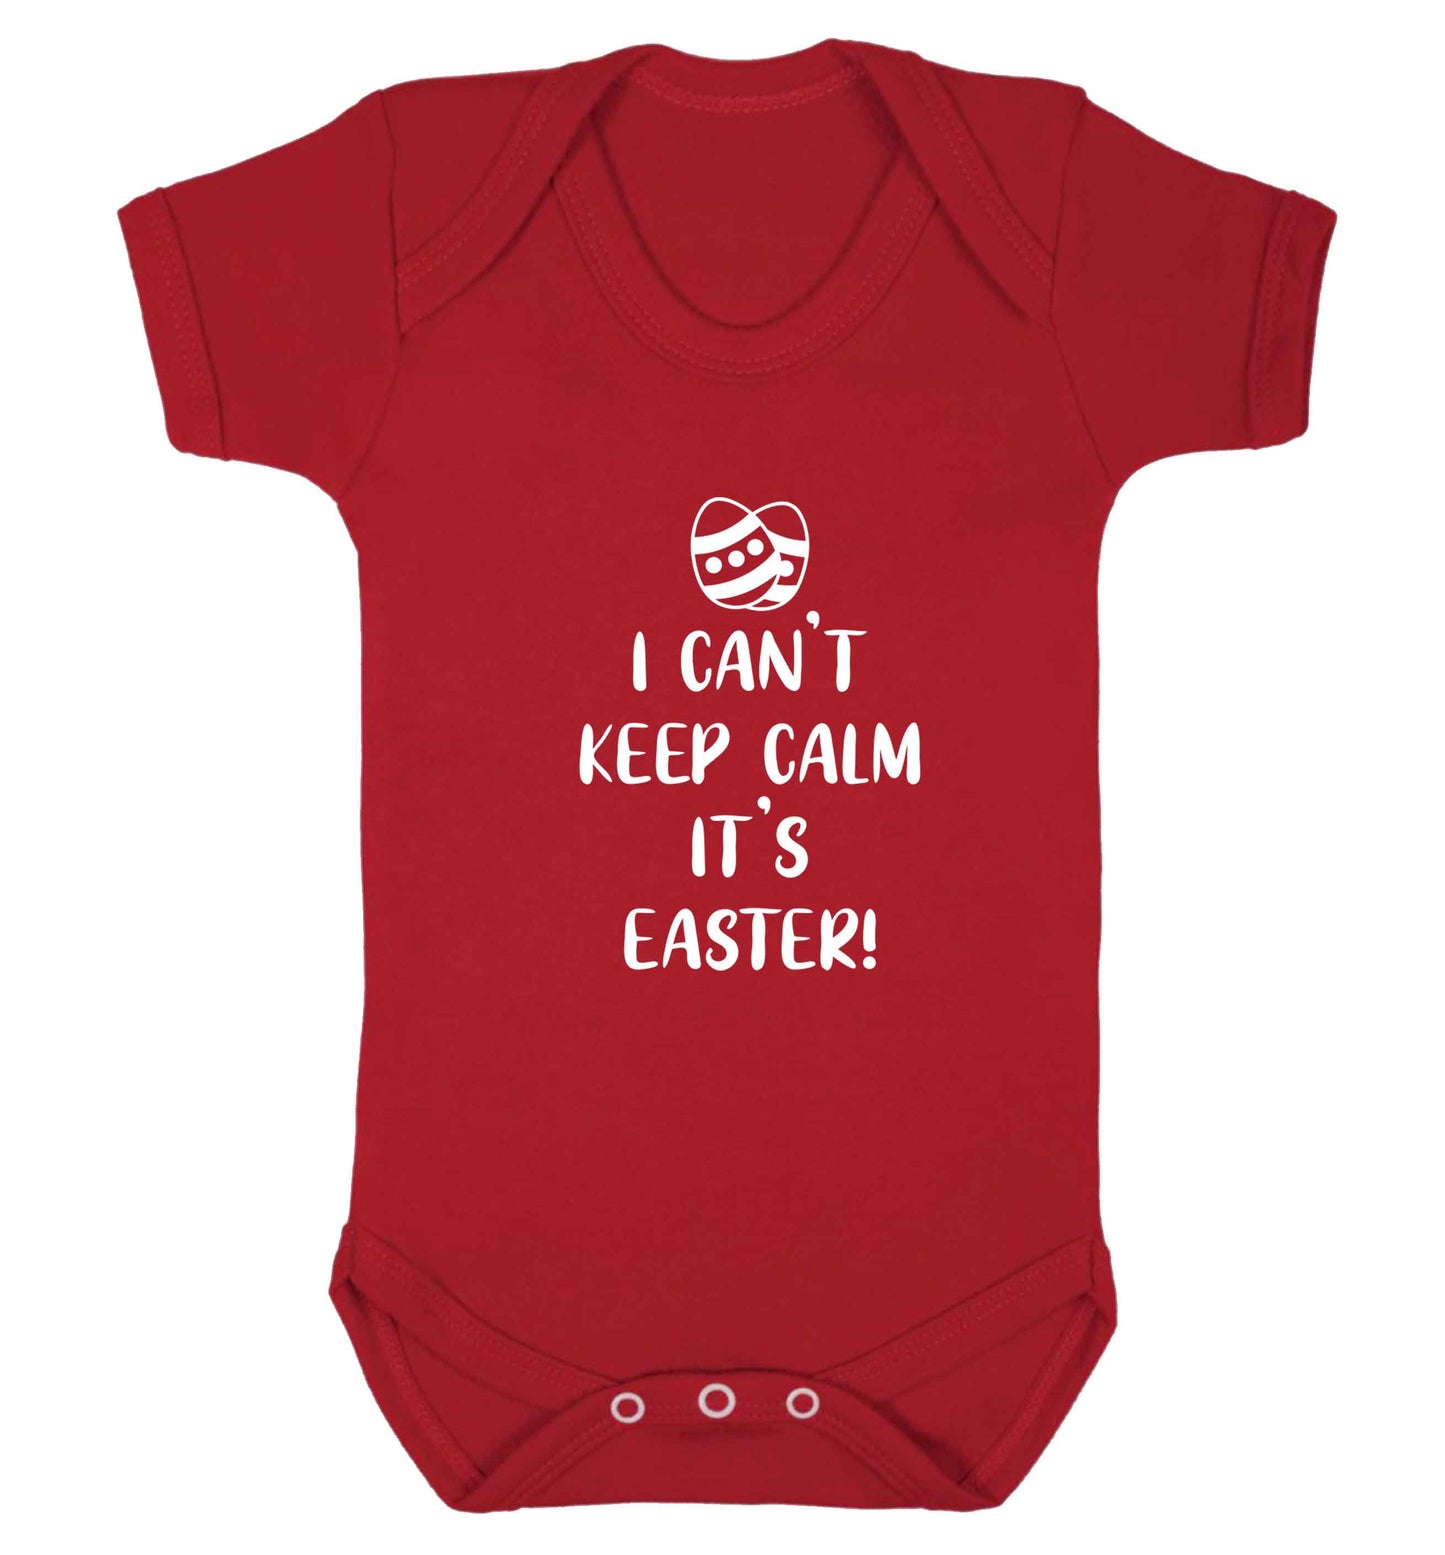 I can't keep calm it's Easter baby vest red 18-24 months